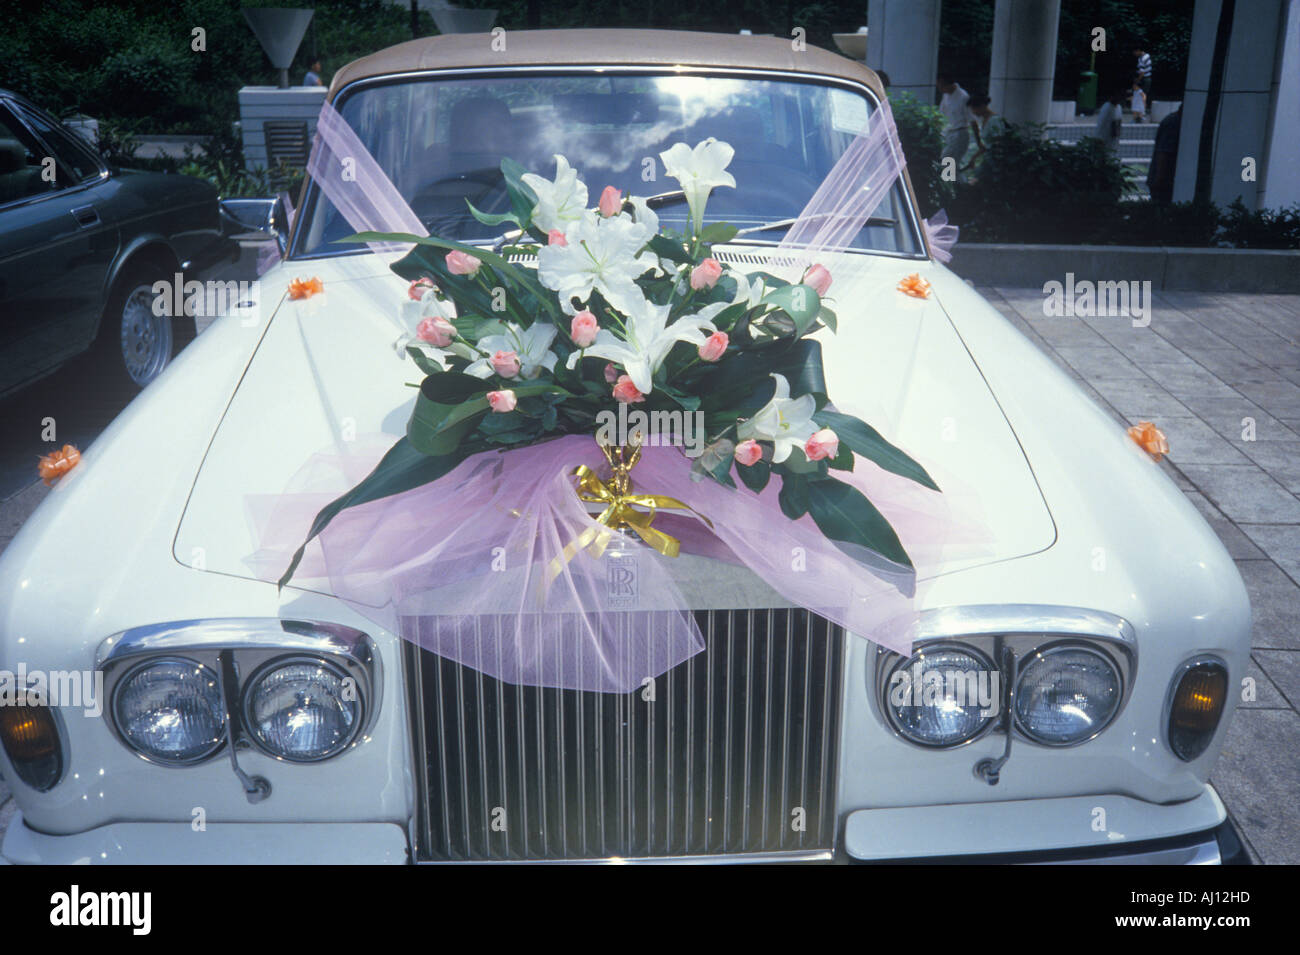 A Rolls Royce decorated for a wedding day ceremony Hong Kong Stock Photo -  Alamy